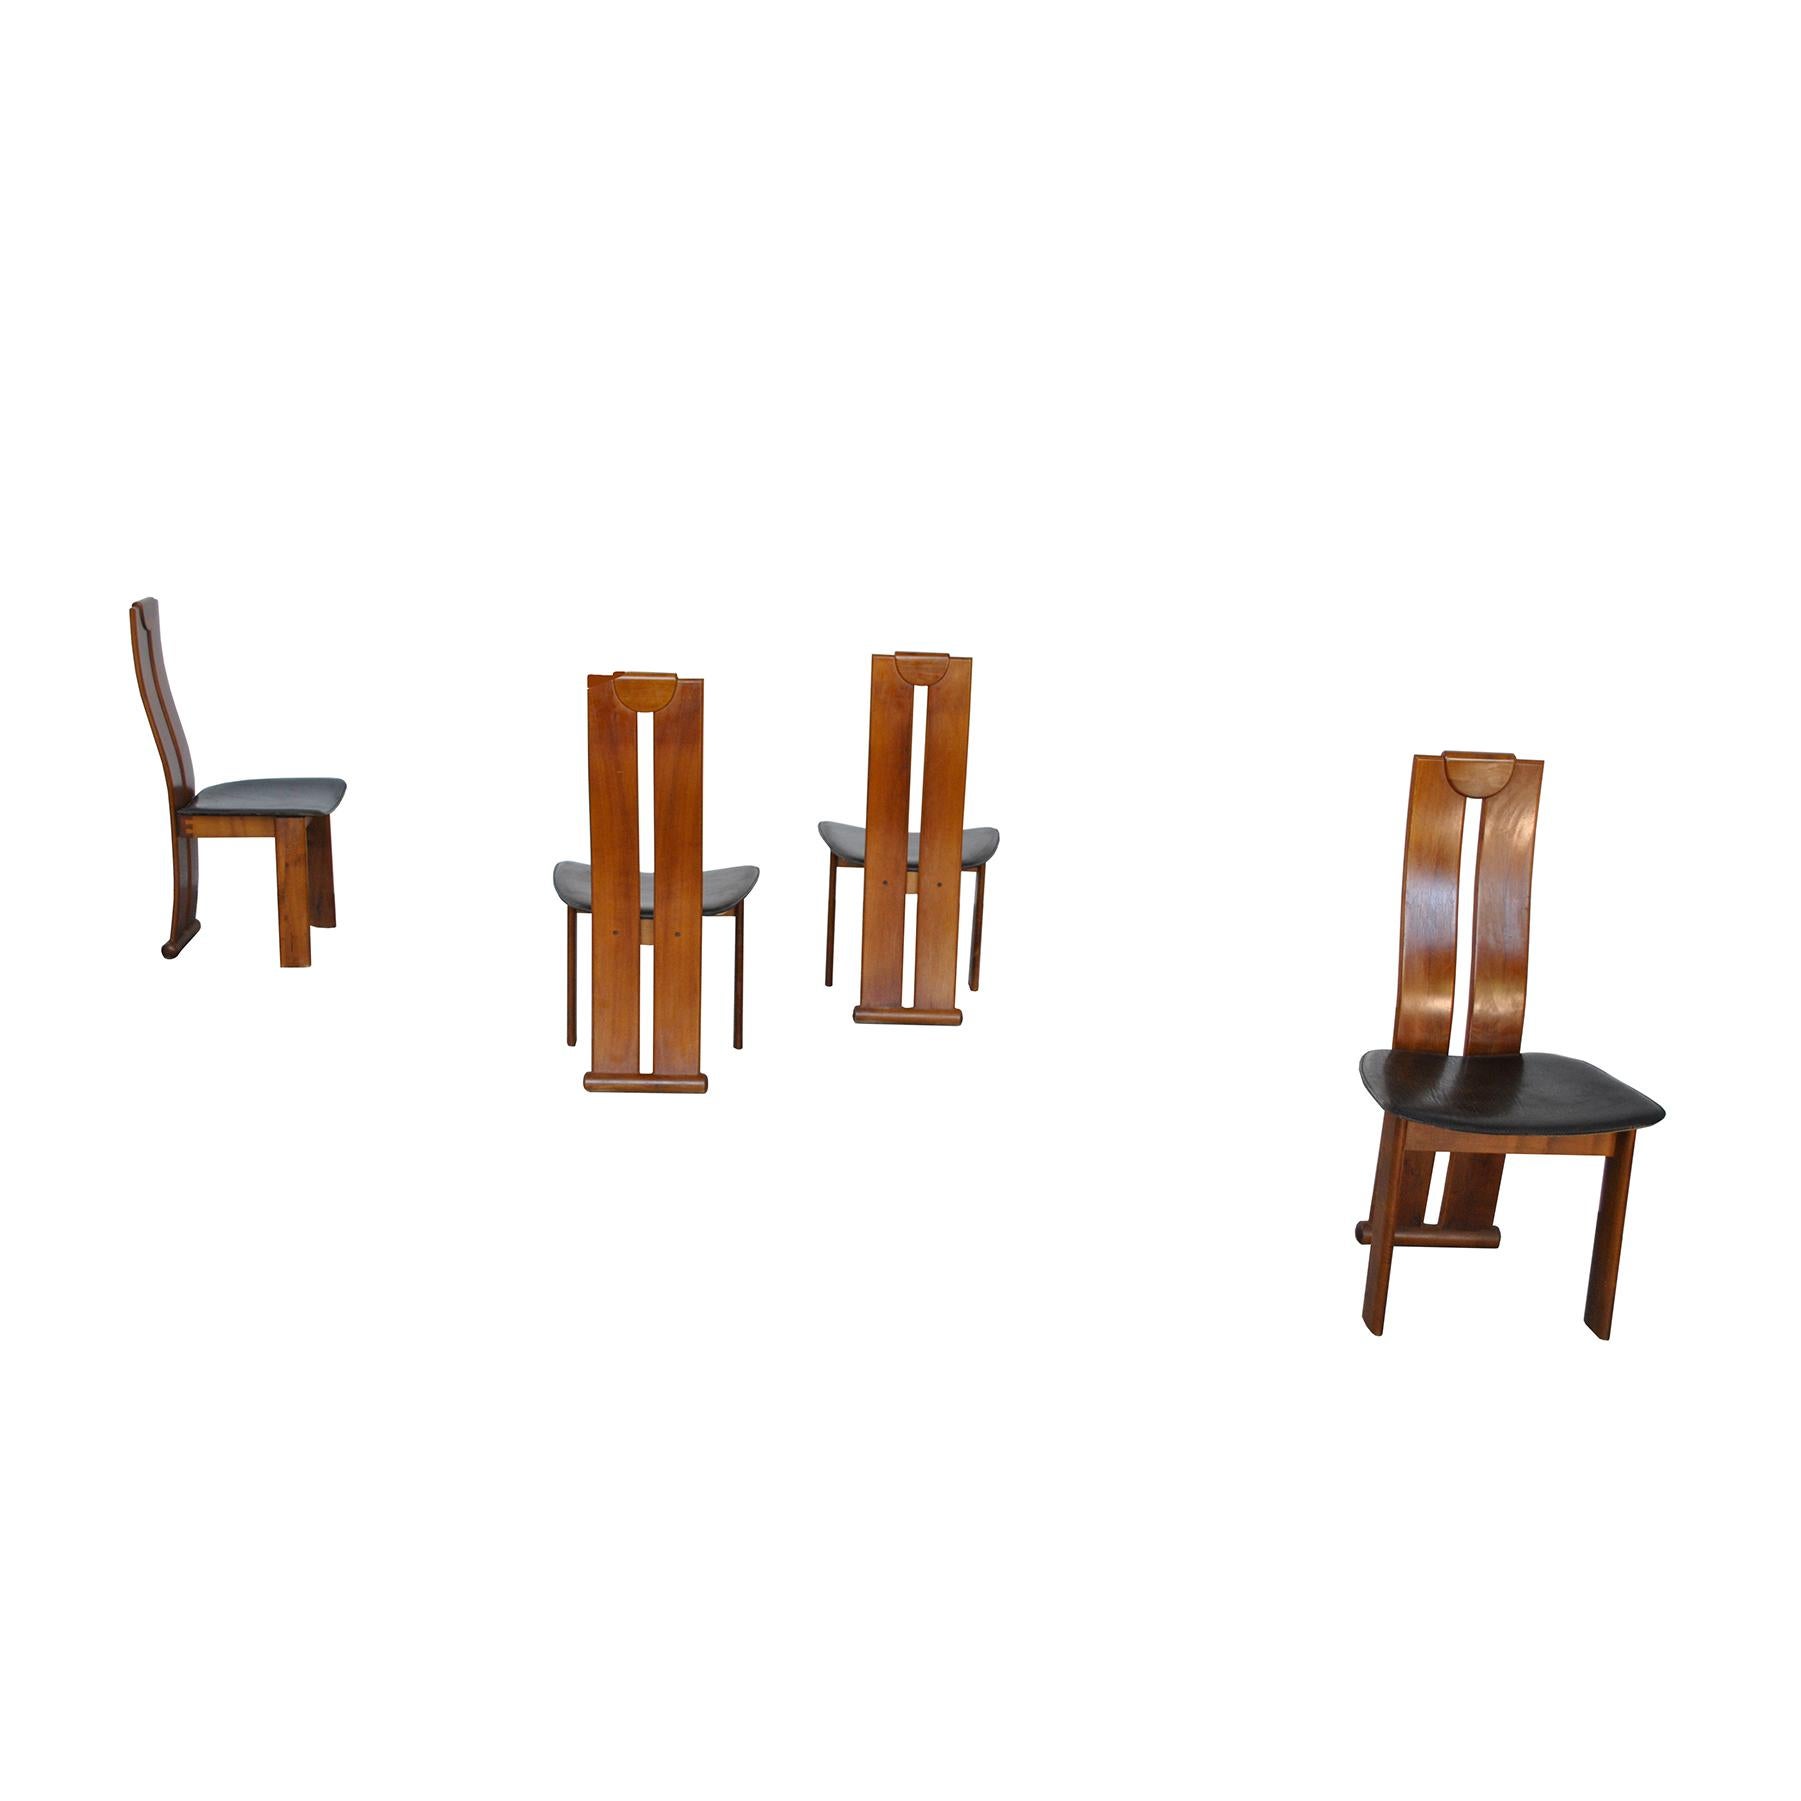 Afra & Tobia Scarpa in the Manner Set of Four Chairs 2